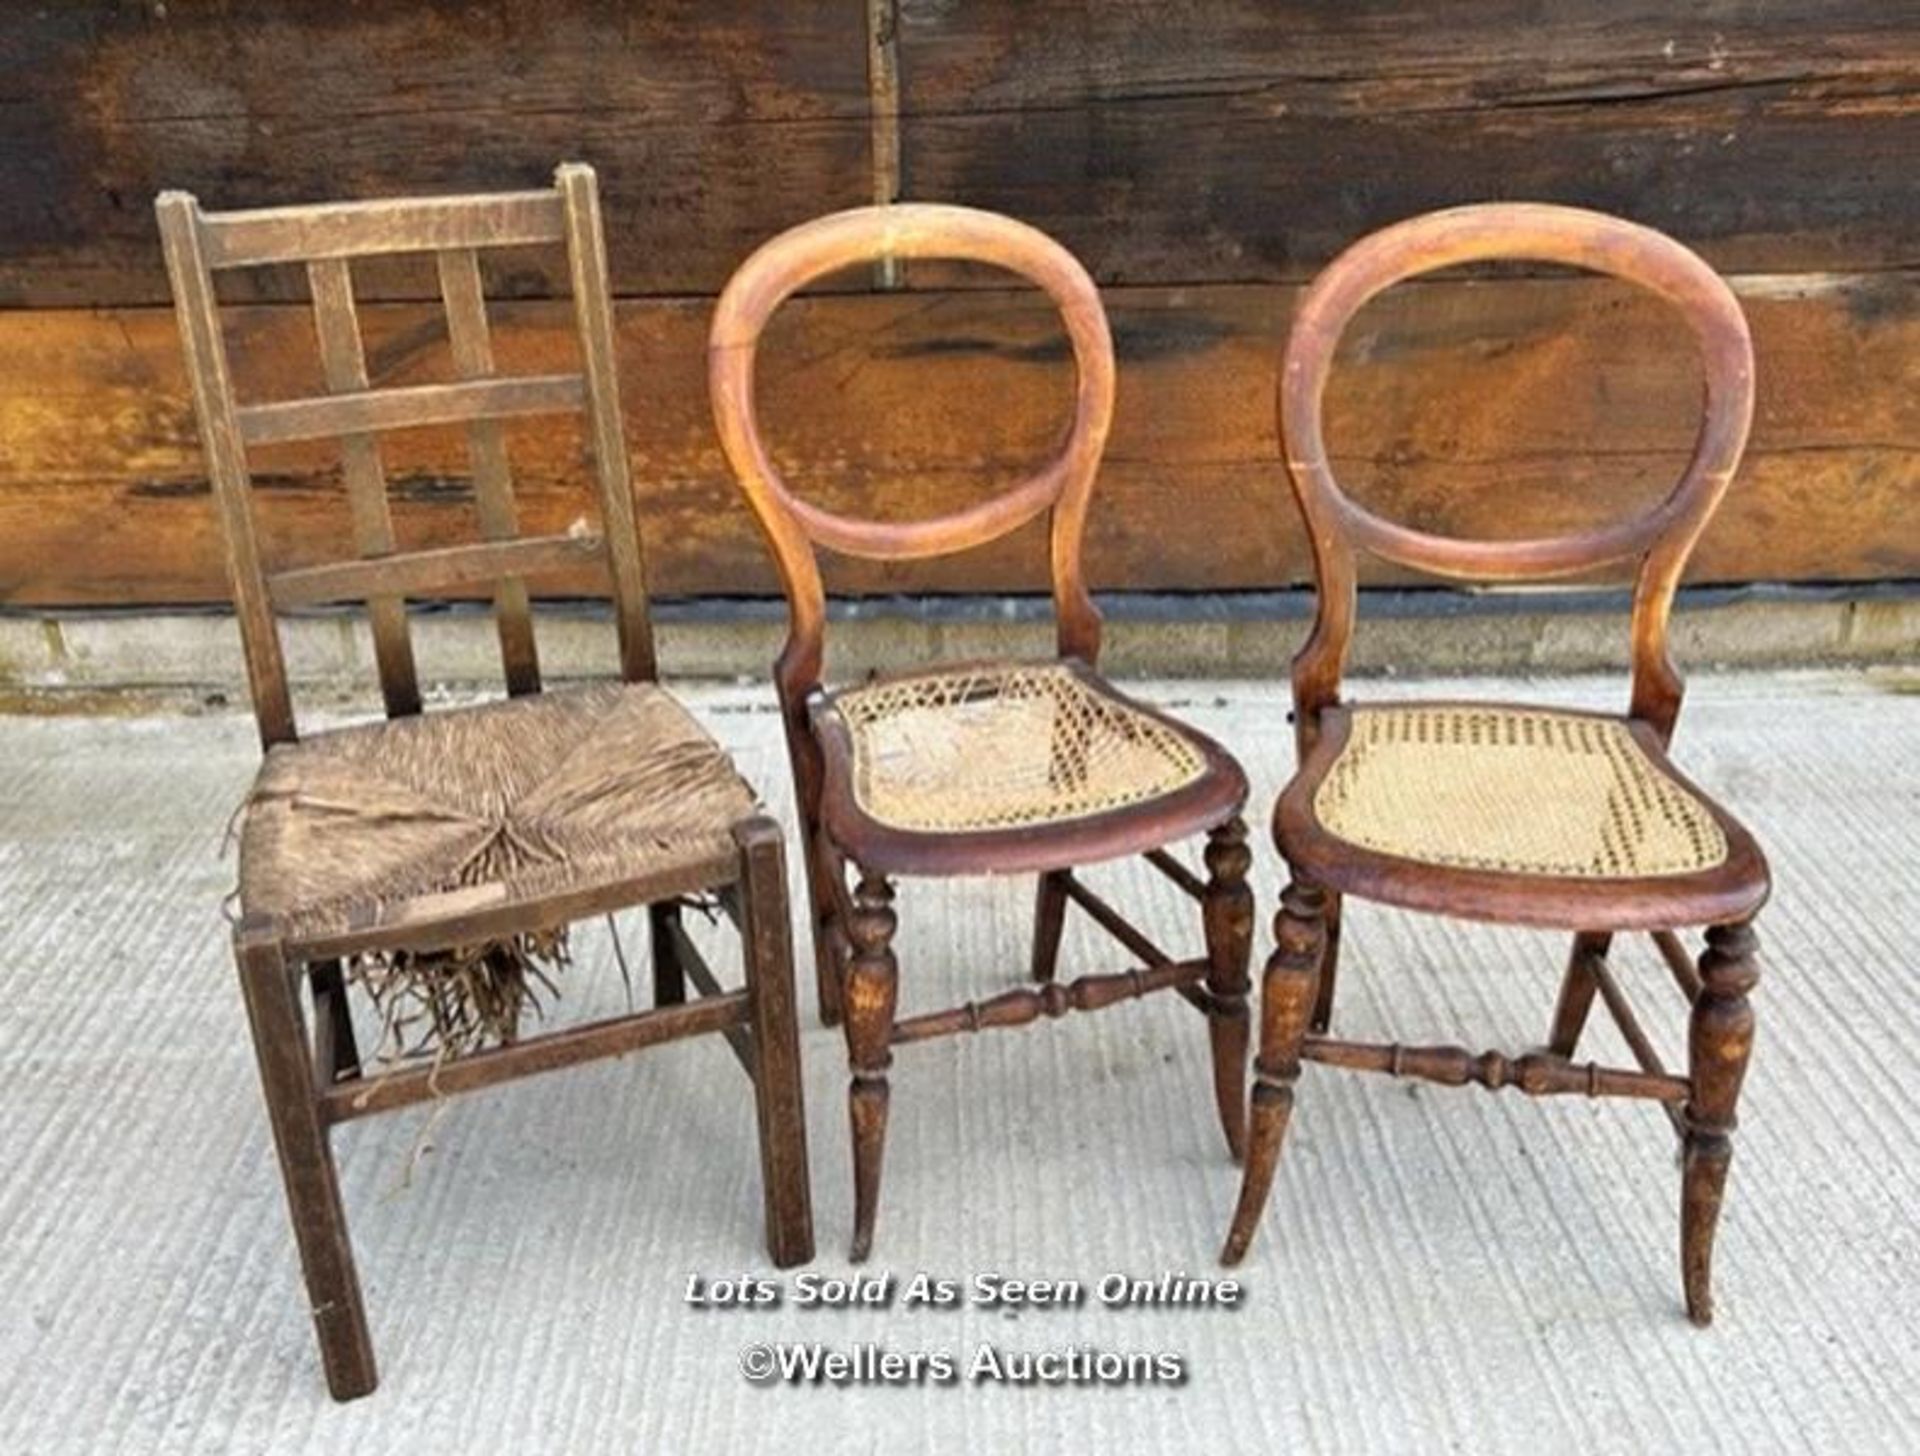 OAK ARTS AND CRAFTS RUSH SEAT, C.1910 PAIR OF VICTORIAN BALLON BACK CHAIRS, REPAIRS NEEDED, 90CM (H)